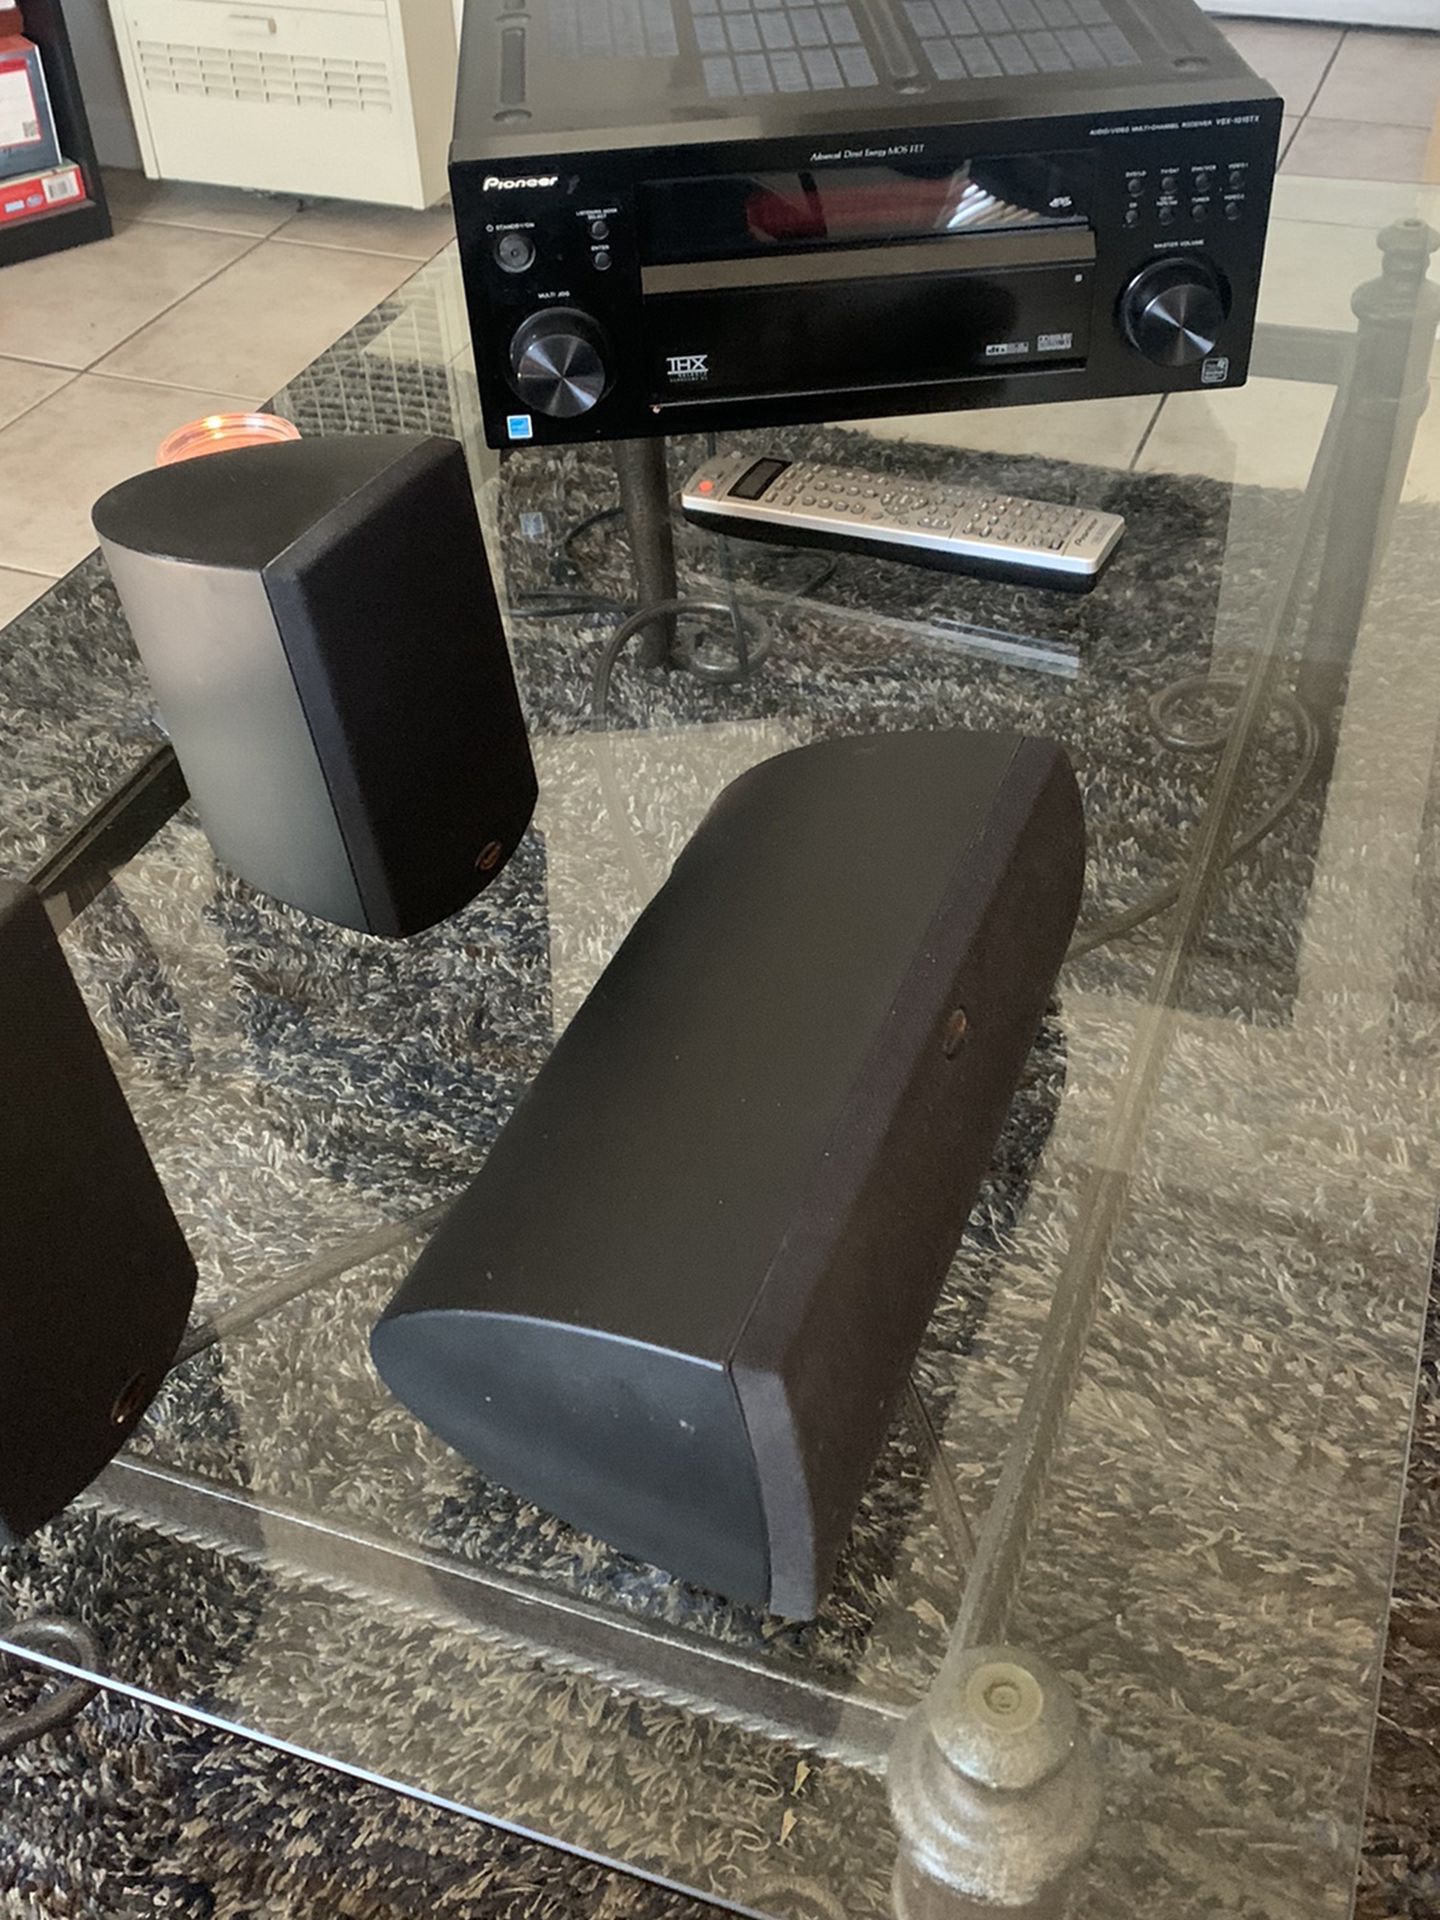 Klipsch Speakers And Pioneer Receiver With 2Stands